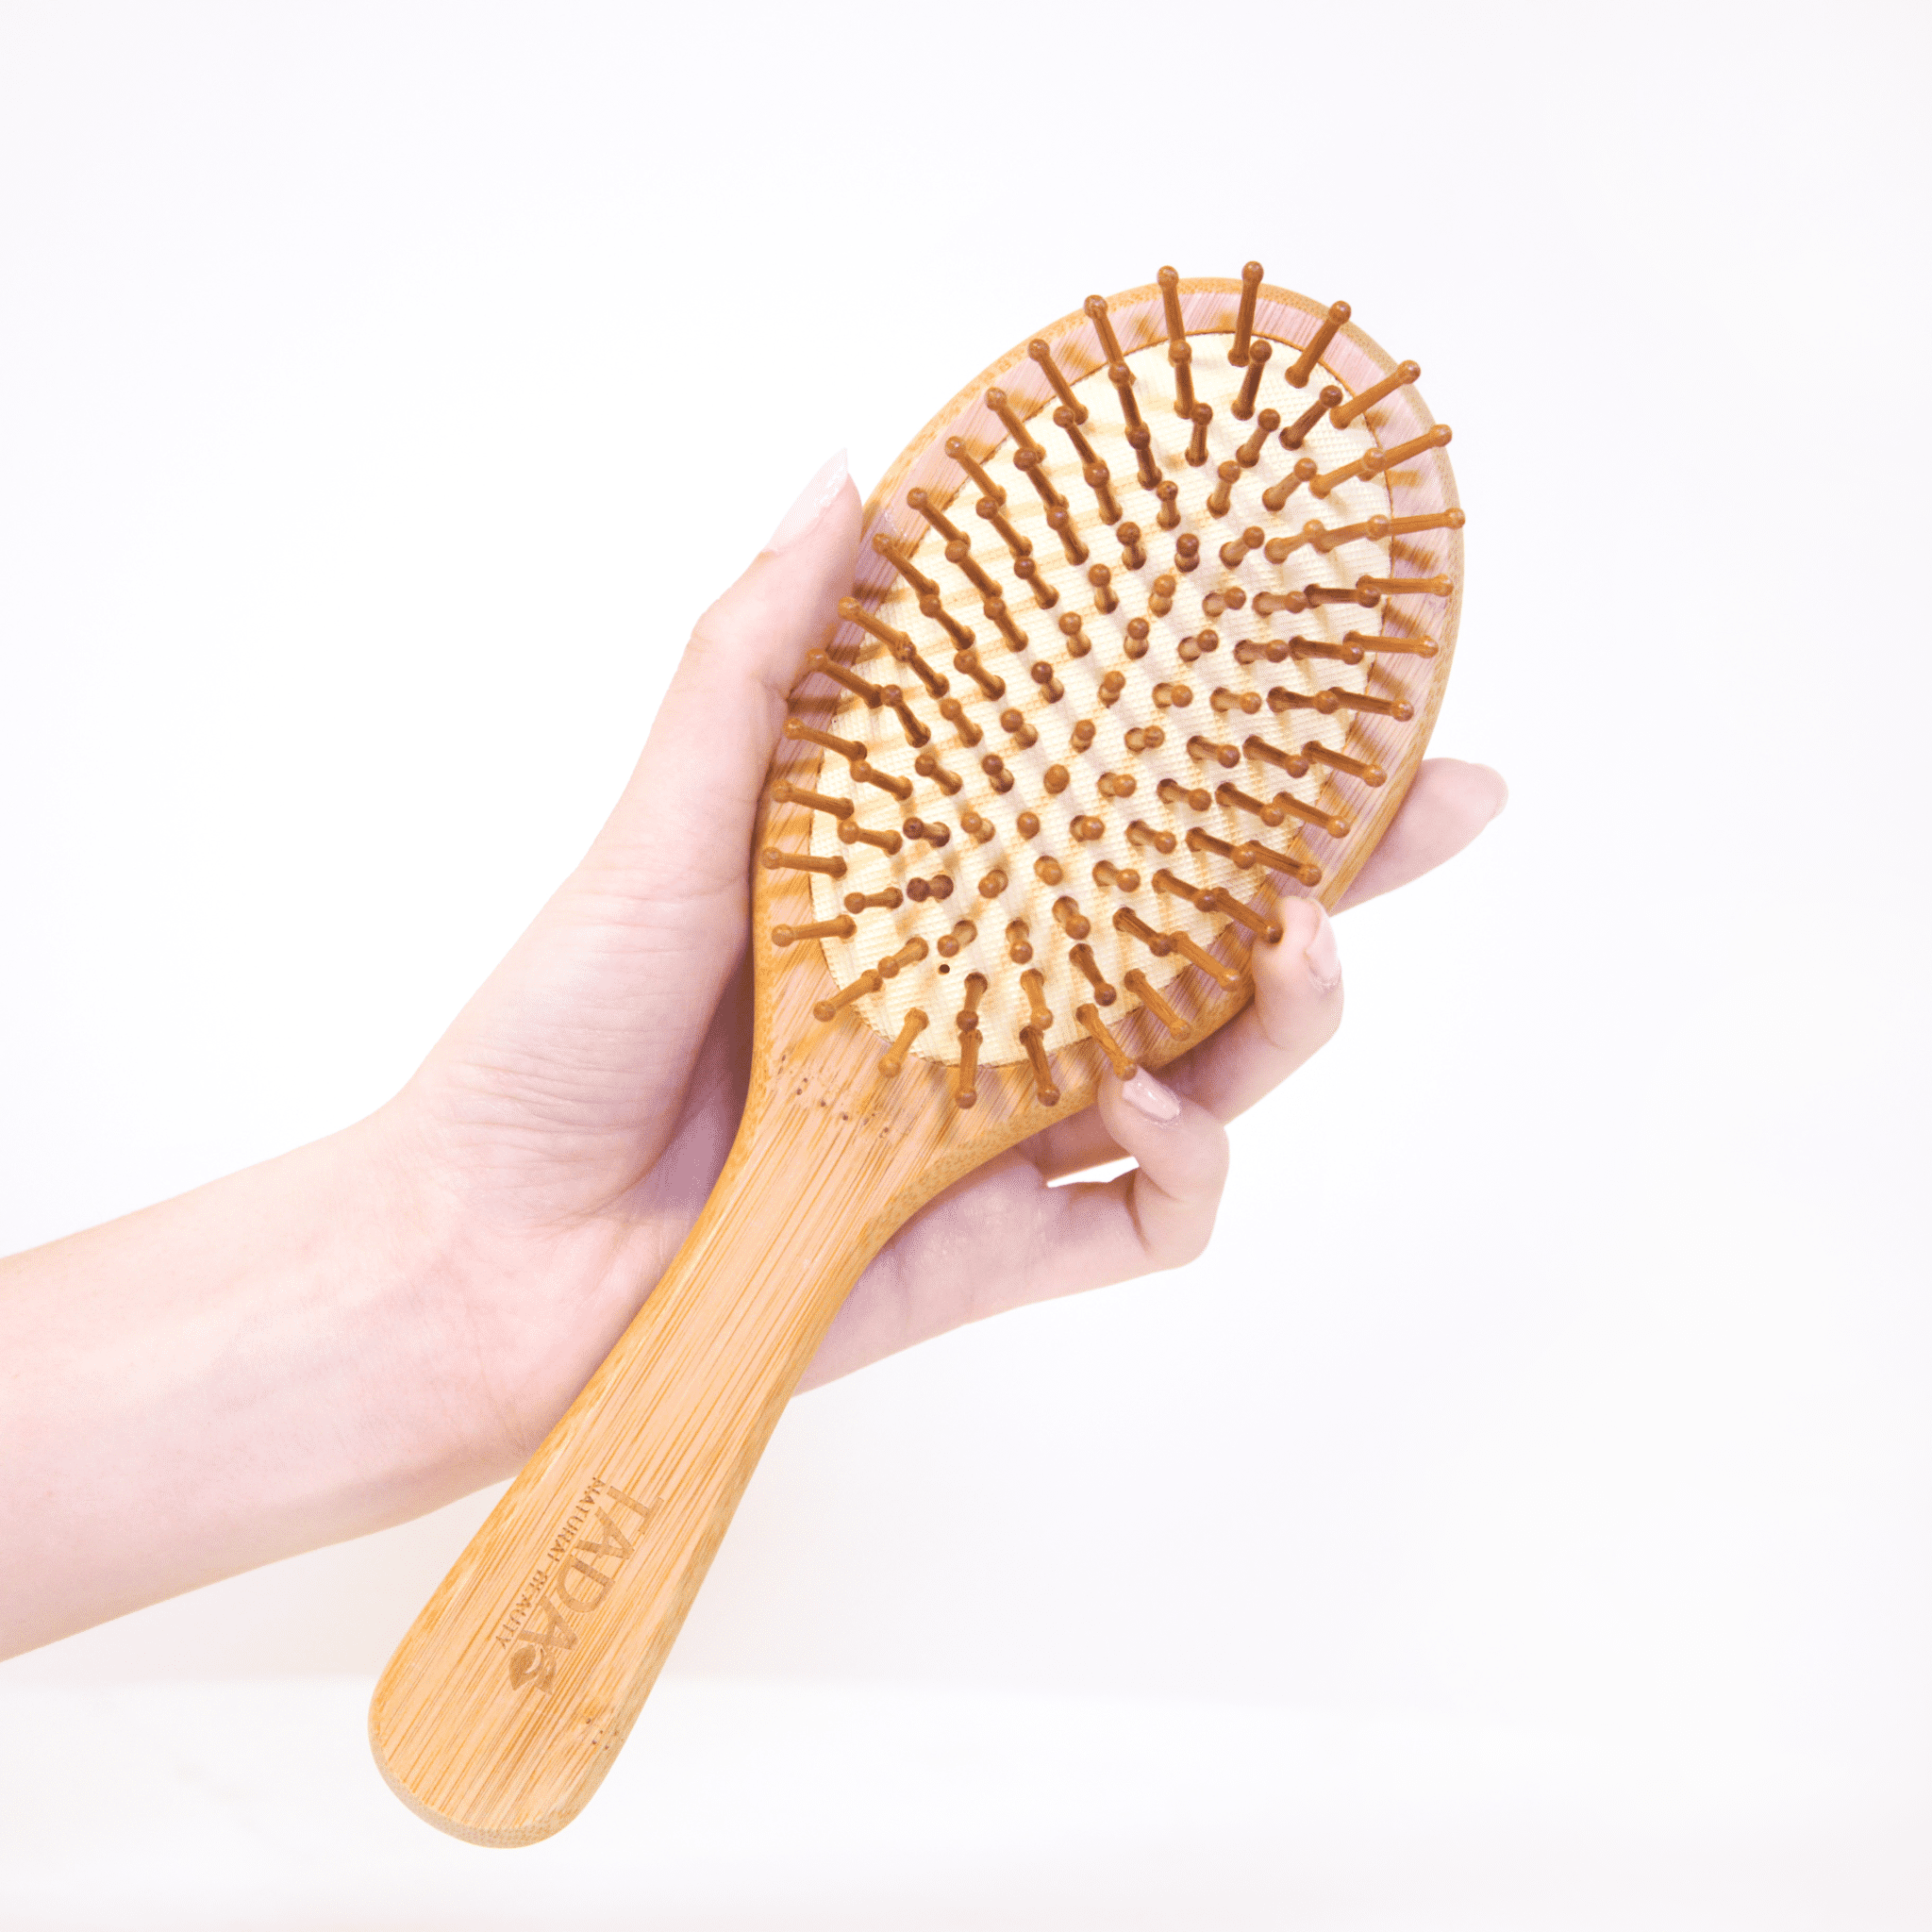 Shop Bamboo Hair Brush for Styling